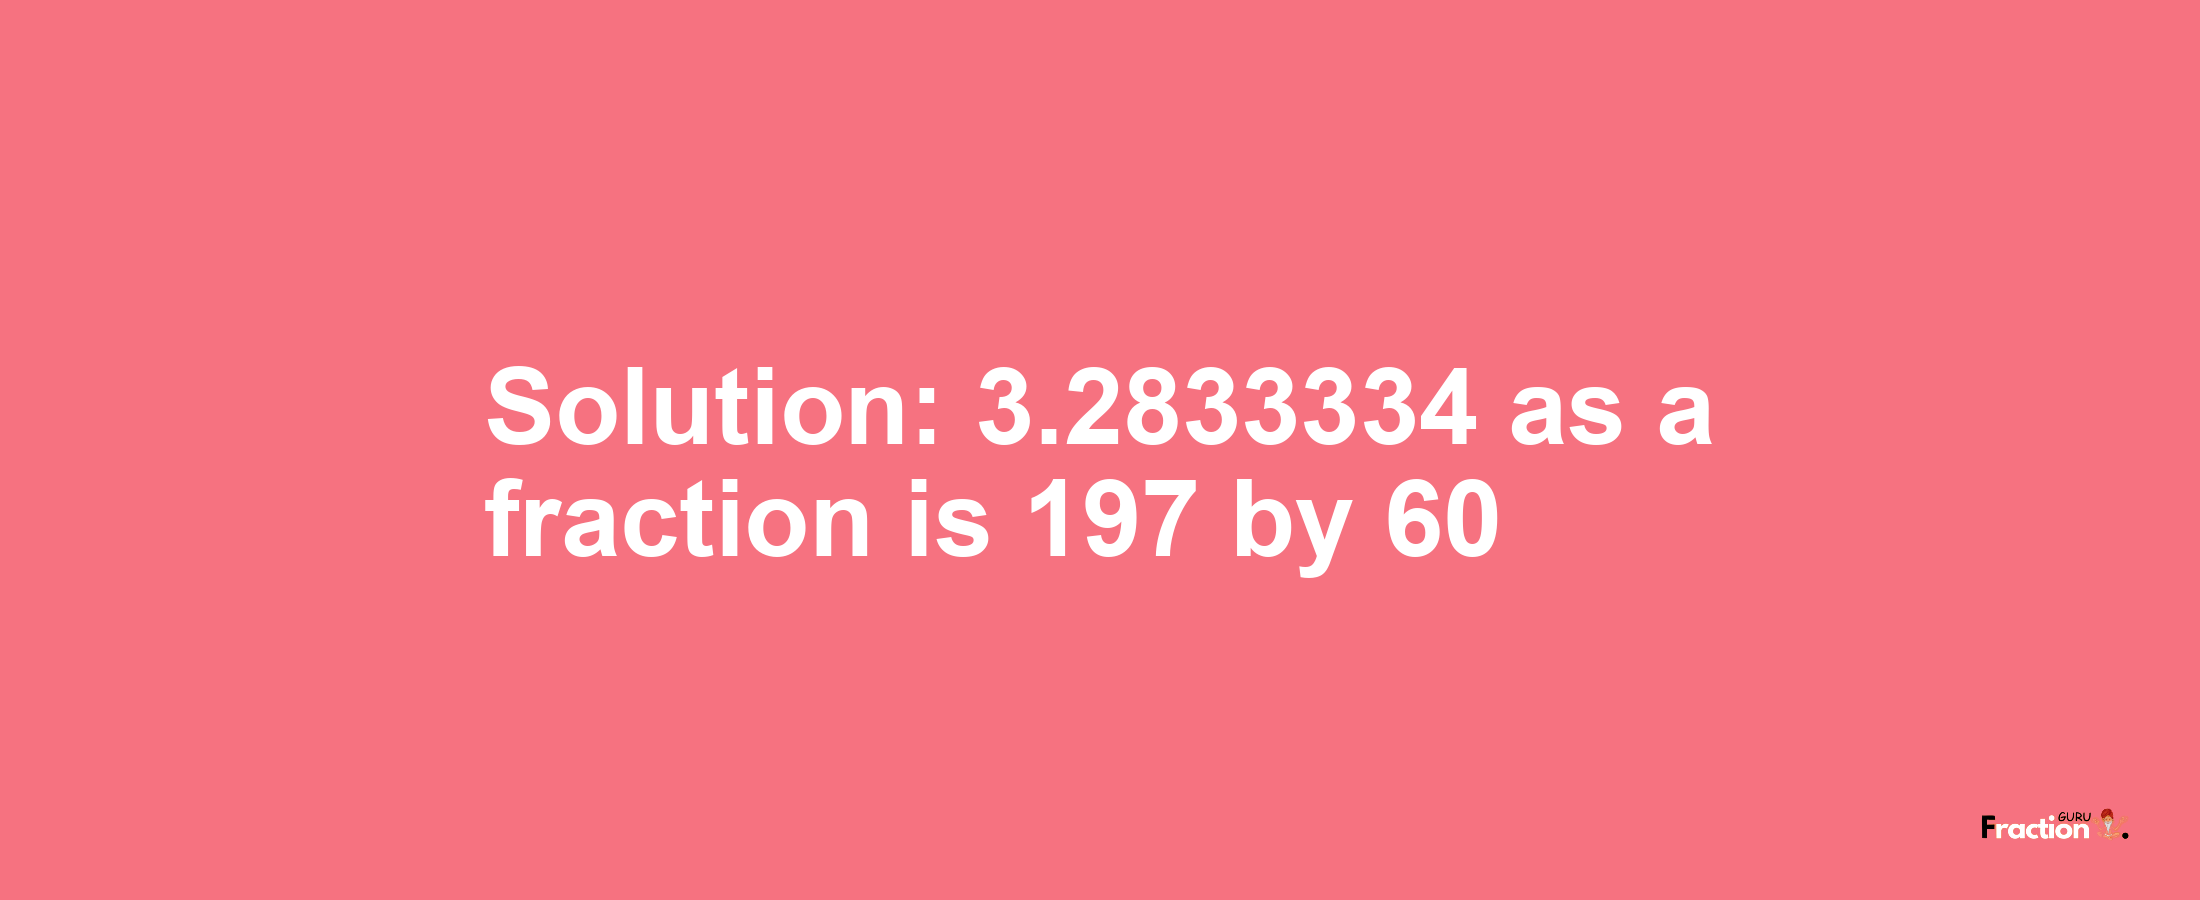 Solution:3.2833334 as a fraction is 197/60